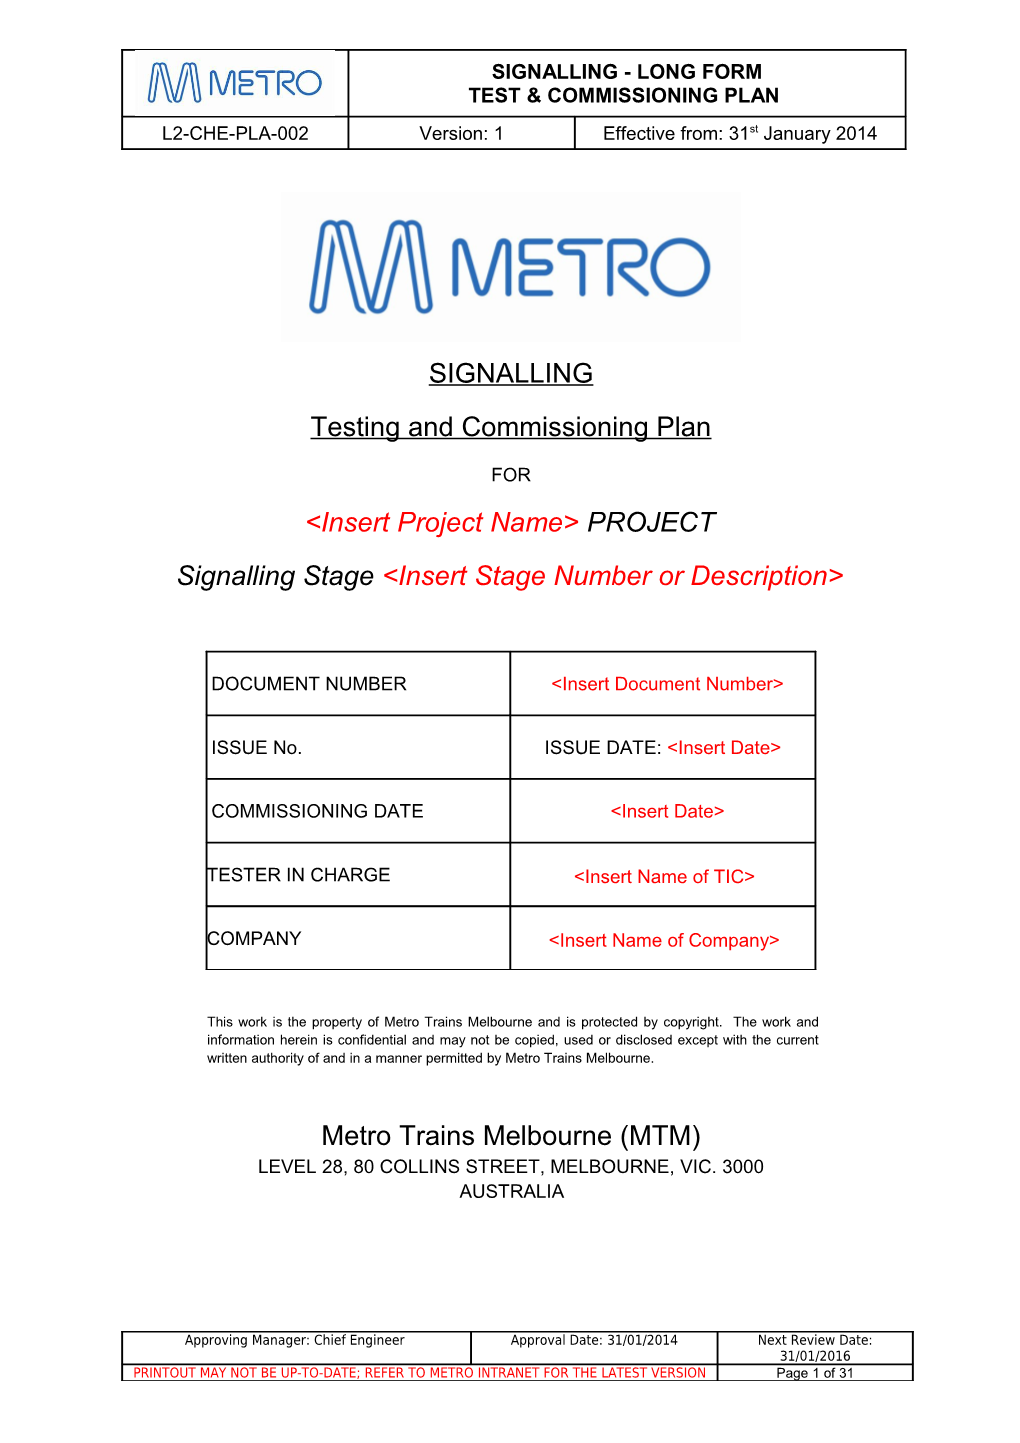 Signalling Long Form Test and Commissioning Plan (Template)